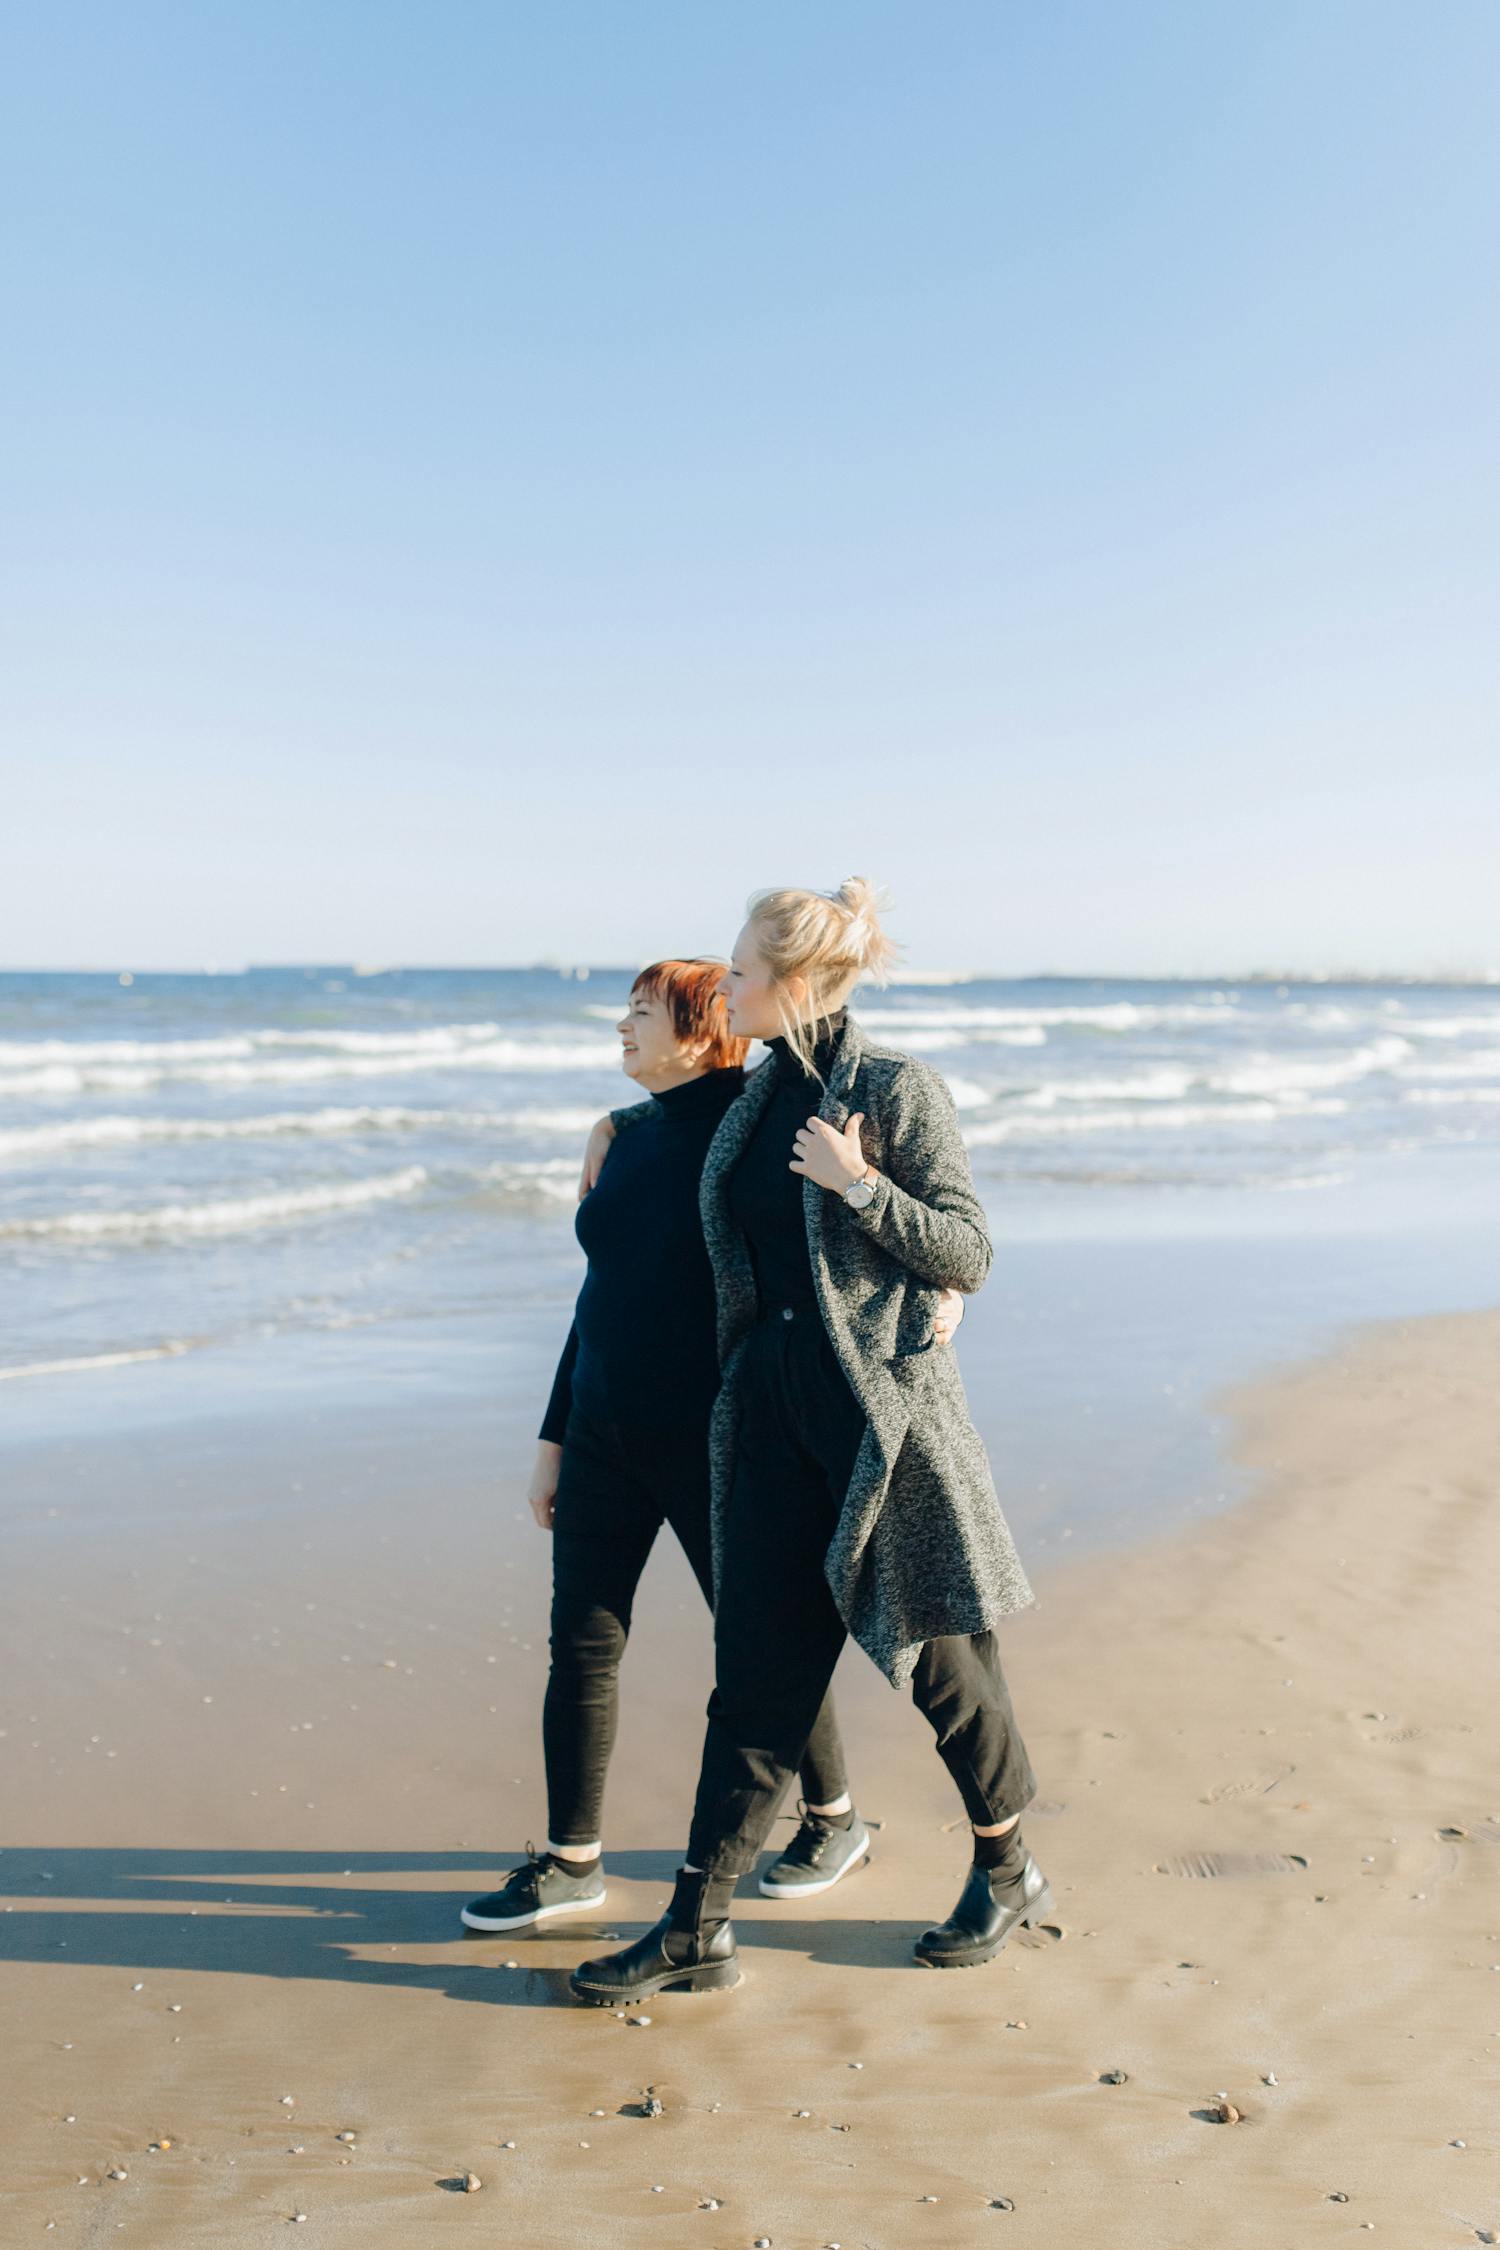 Woman in Black Coat Standing on Beach · Free Stock Photo